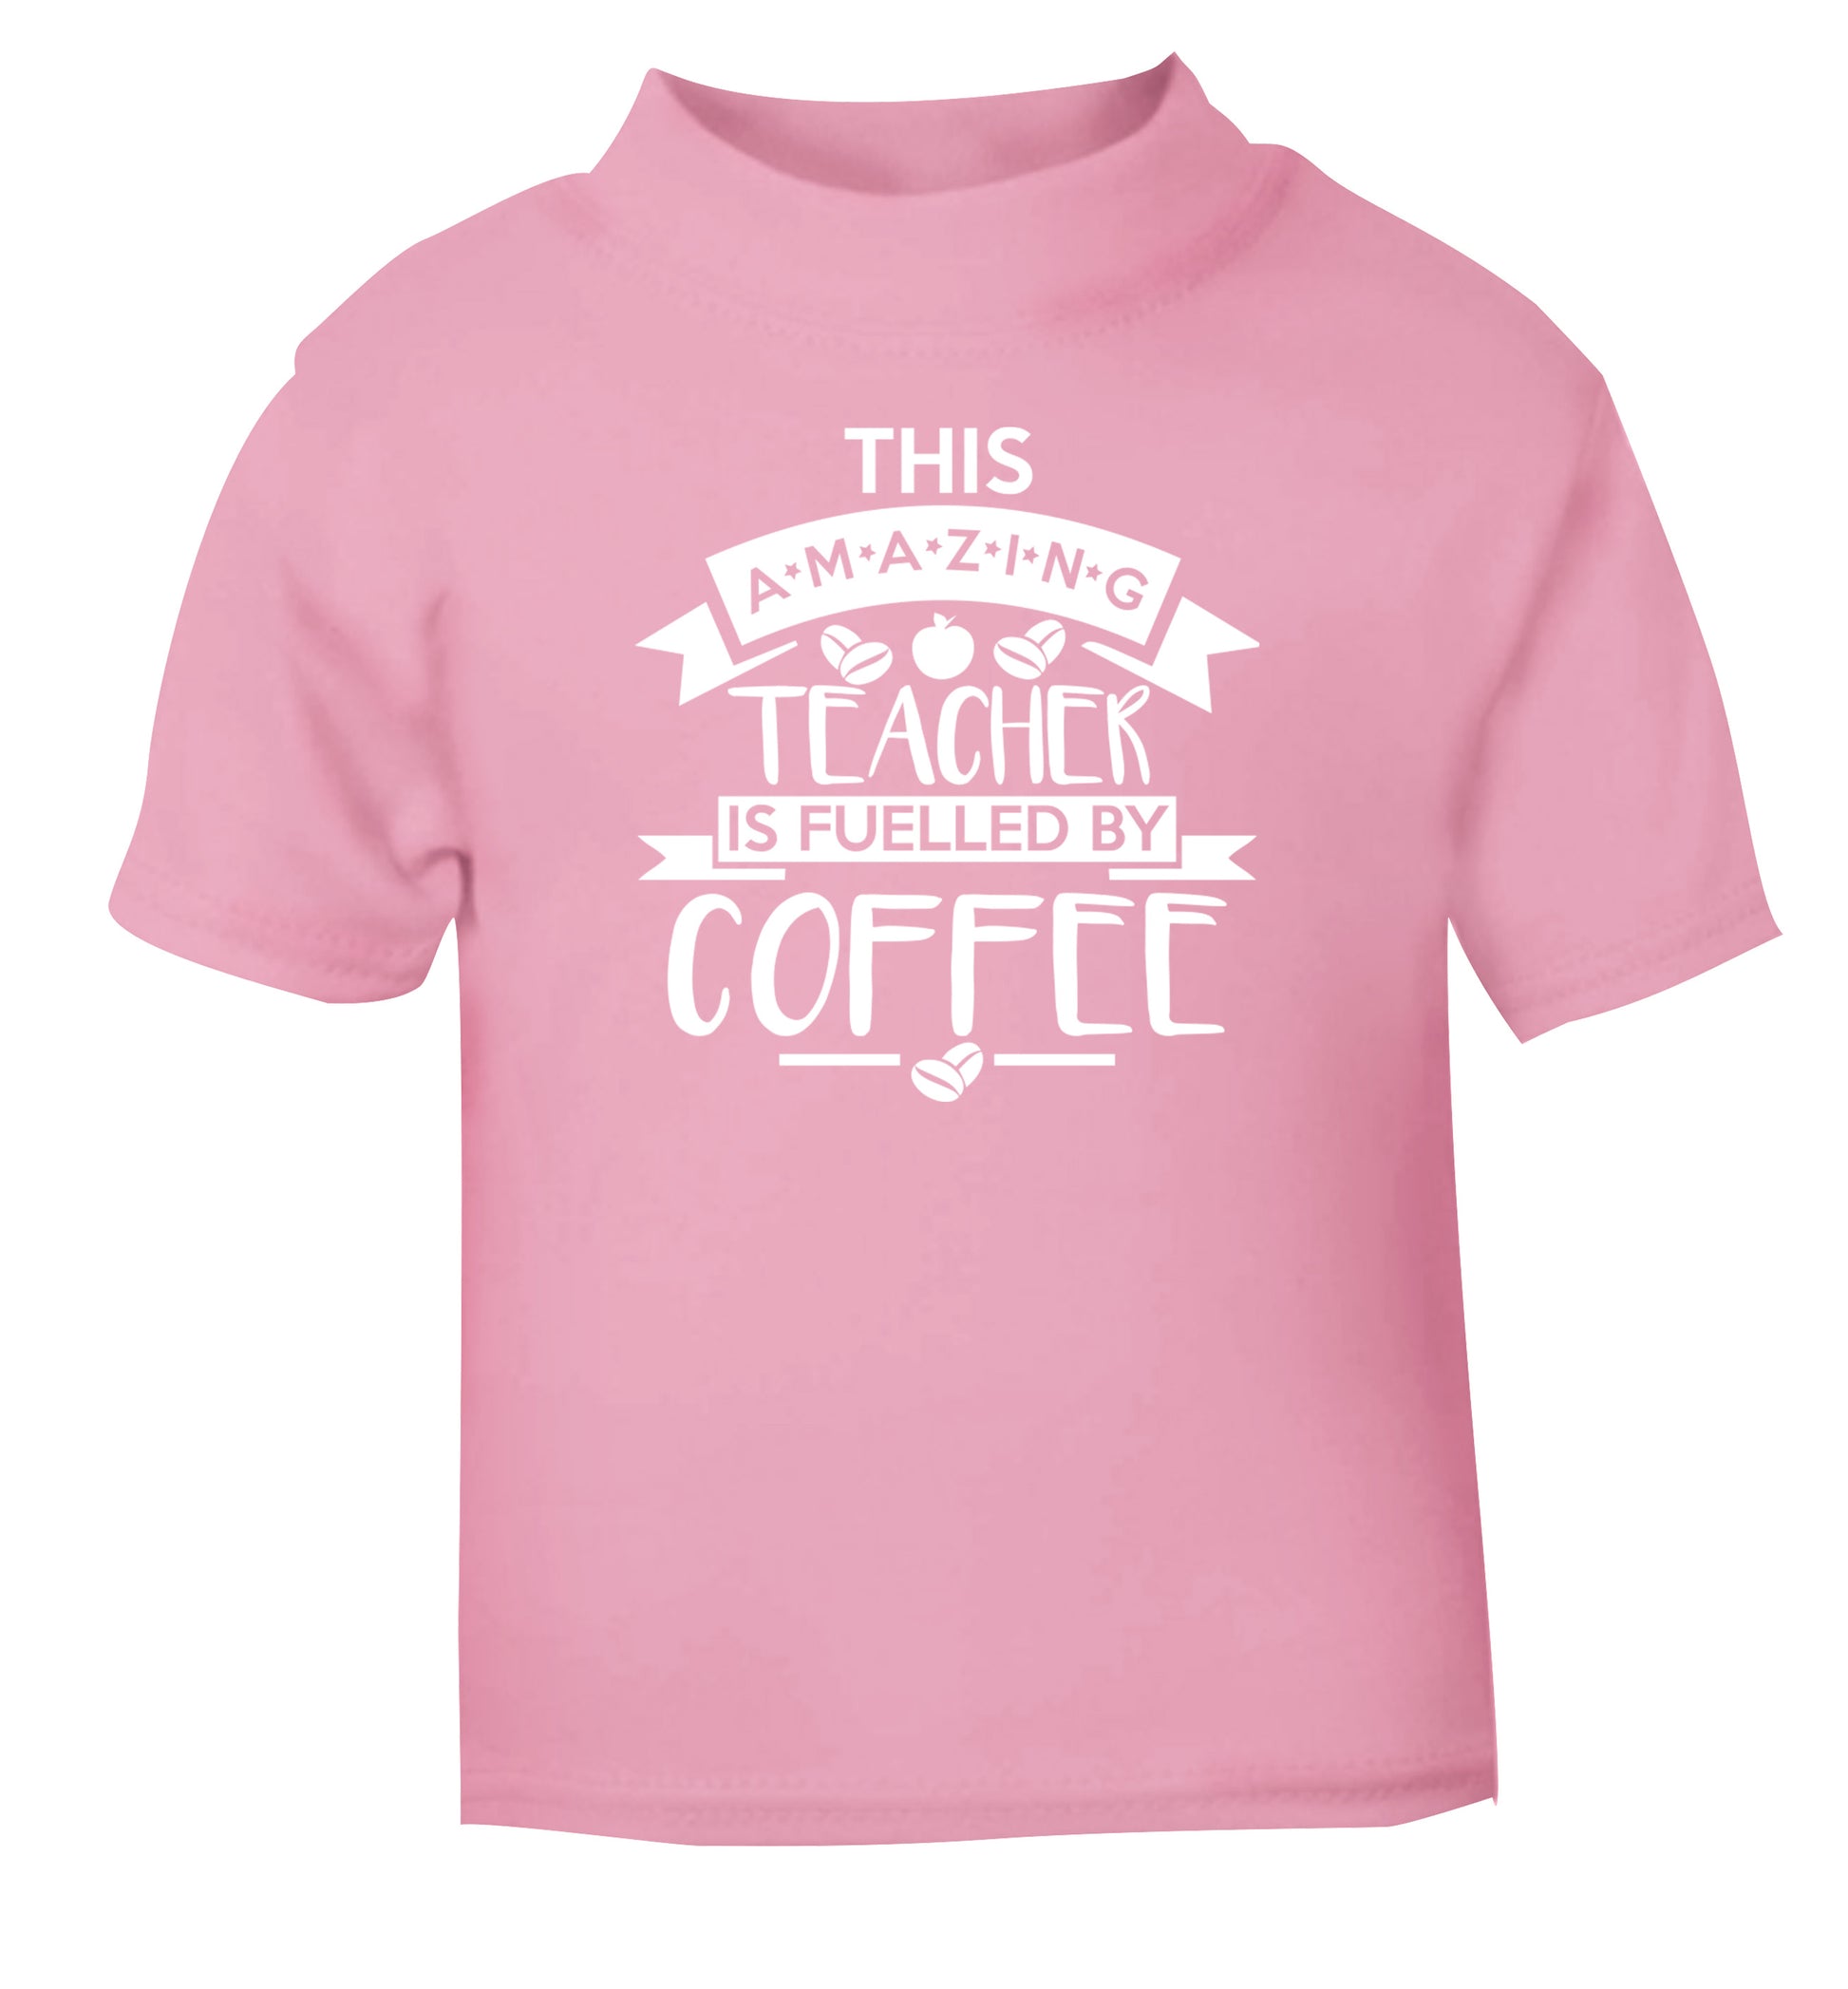 This amazing teacher is fuelled by coffee light pink Baby Toddler Tshirt 2 Years